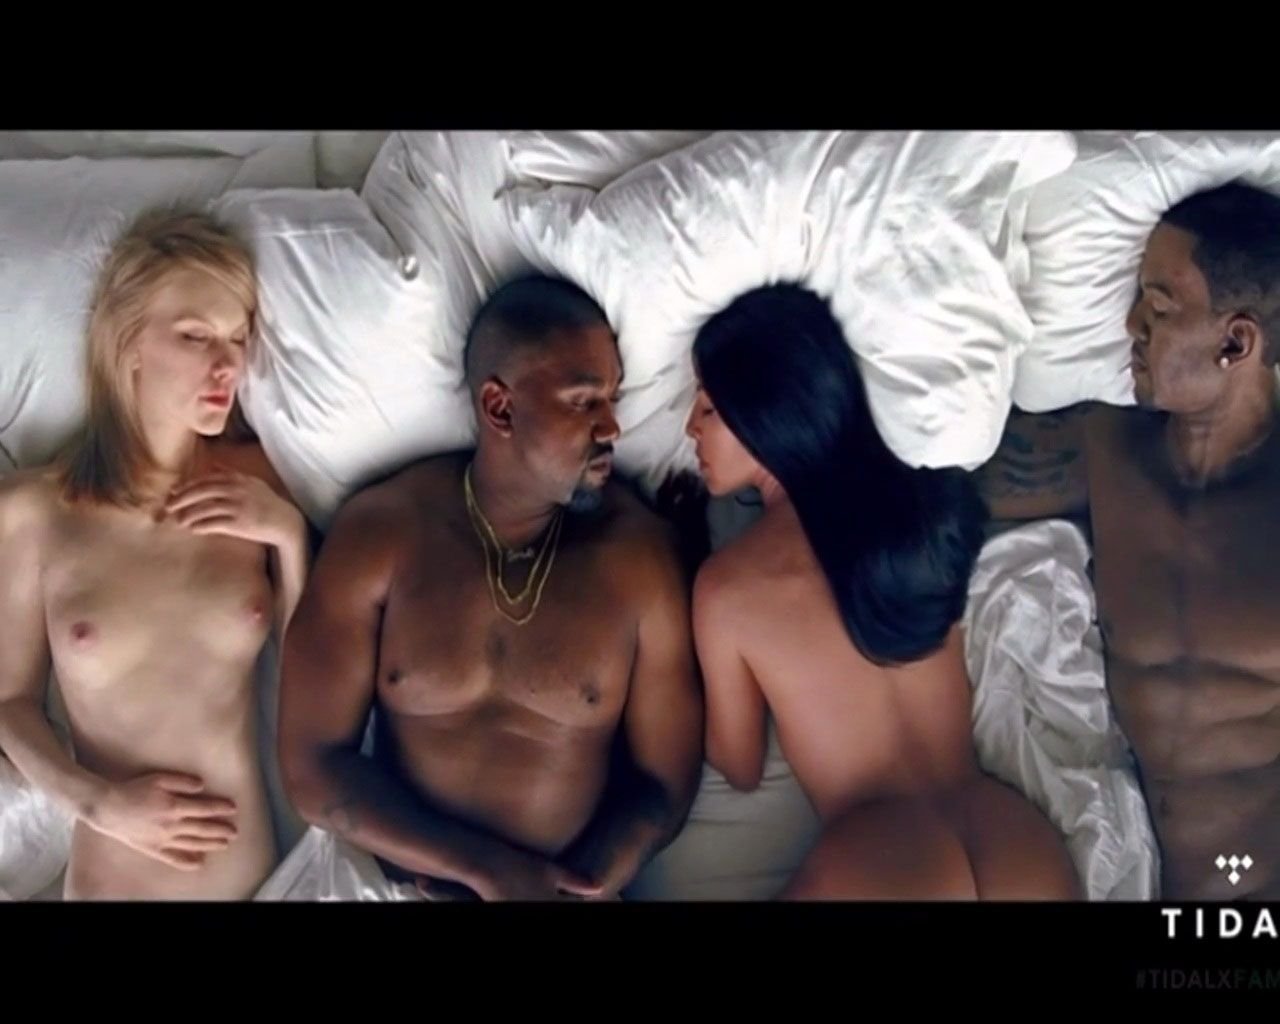 Kim Kardashian, Amber Rose, Caitlyn Jenner and other famous naked people fr...